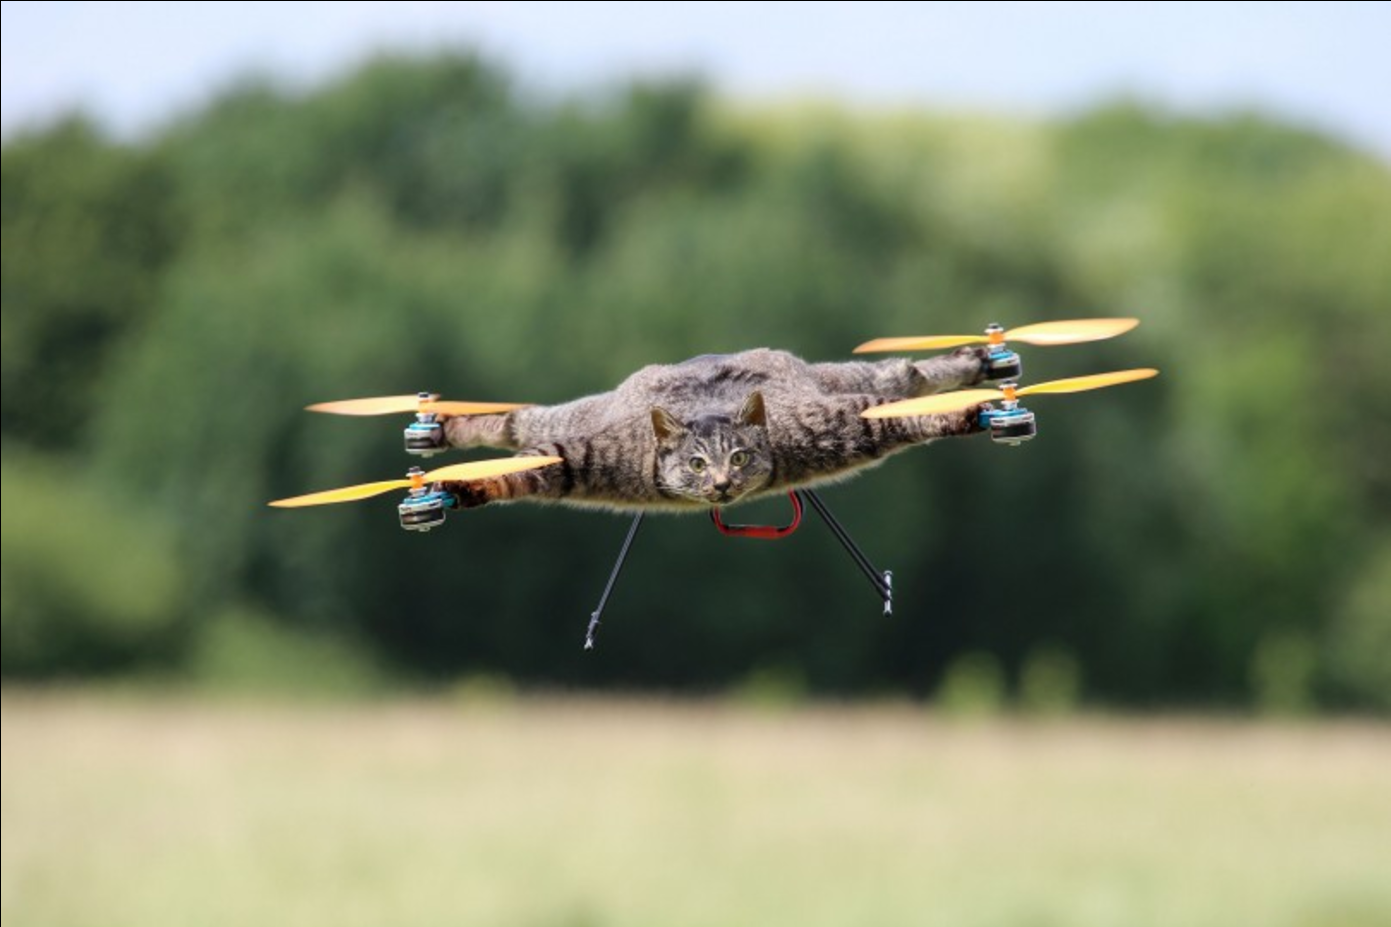 Copter Company Turns a Dead Cat Into a Drone